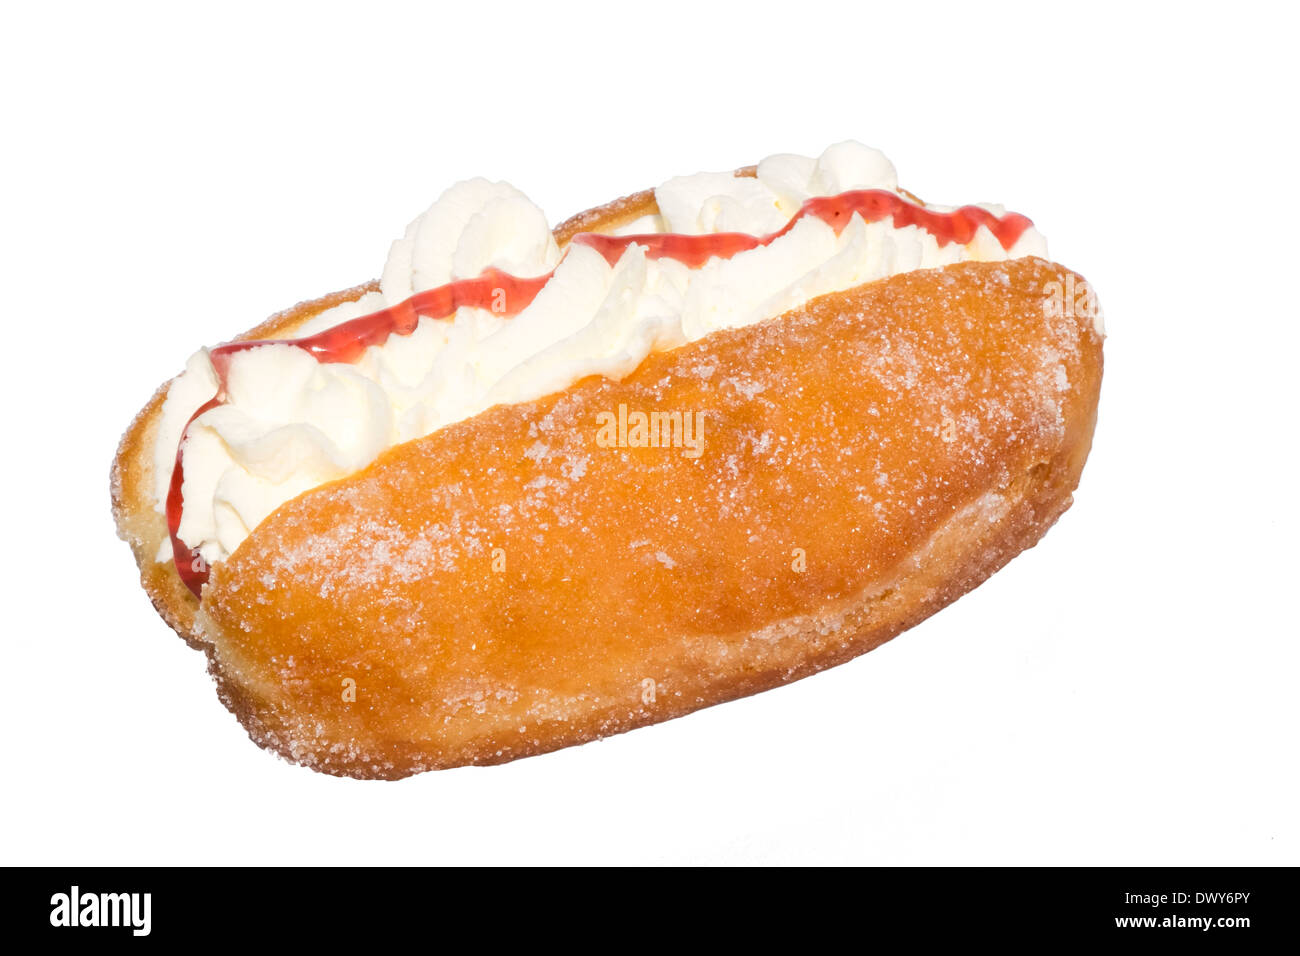 Donut with cream & jam isolated against a white background. Stock Photo